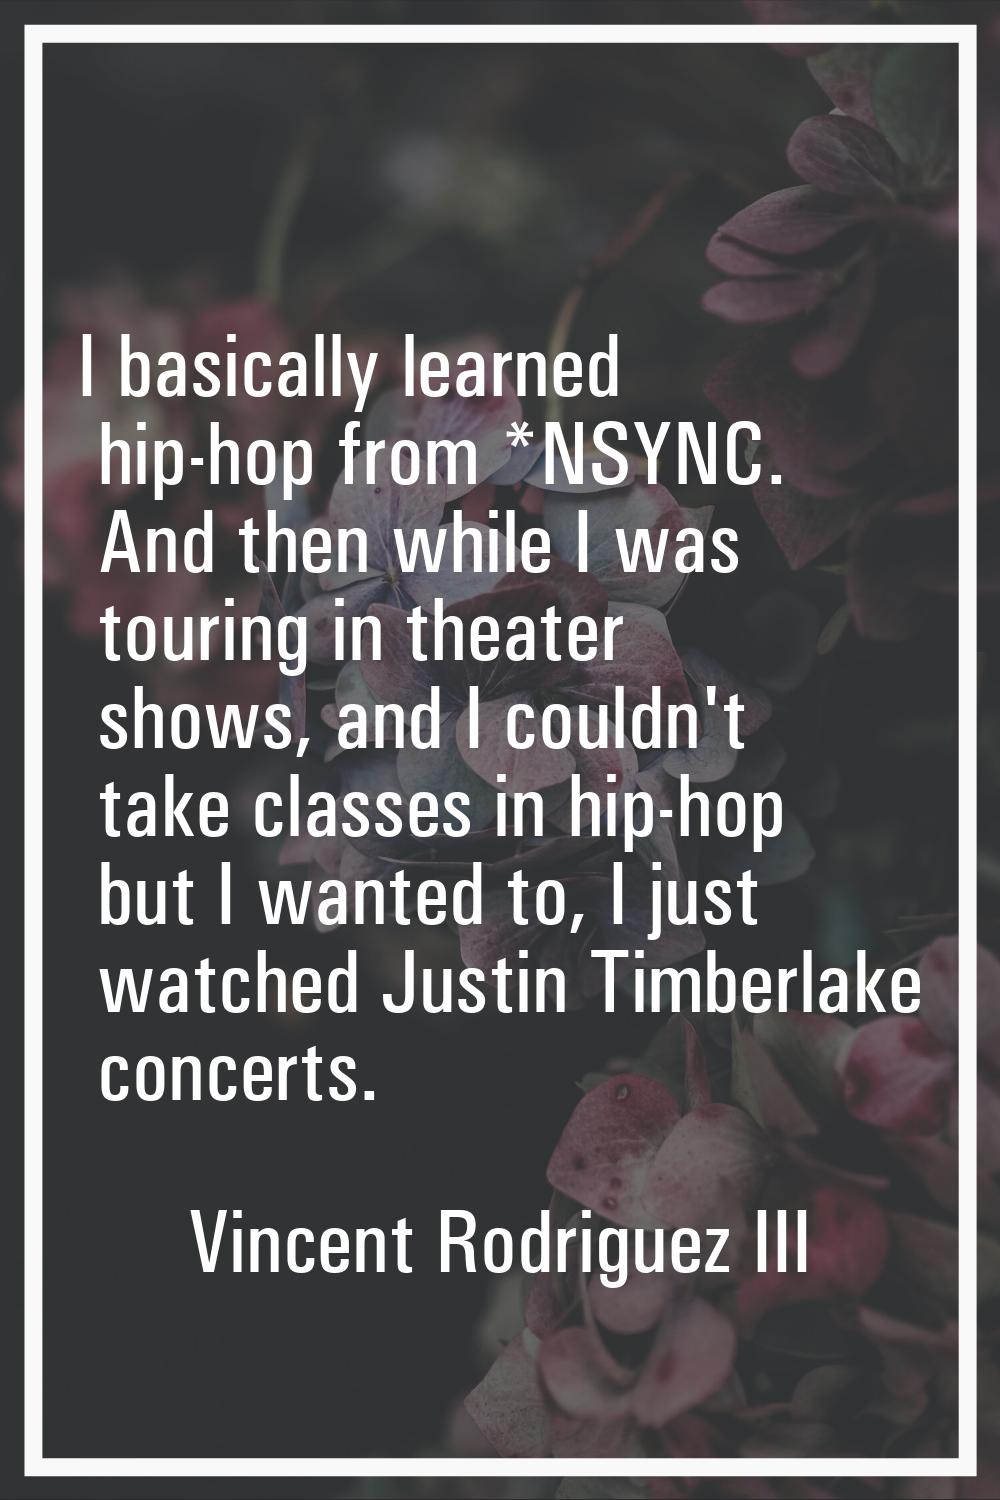 I basically learned hip-hop from *NSYNC. And then while I was touring in theater shows, and I could